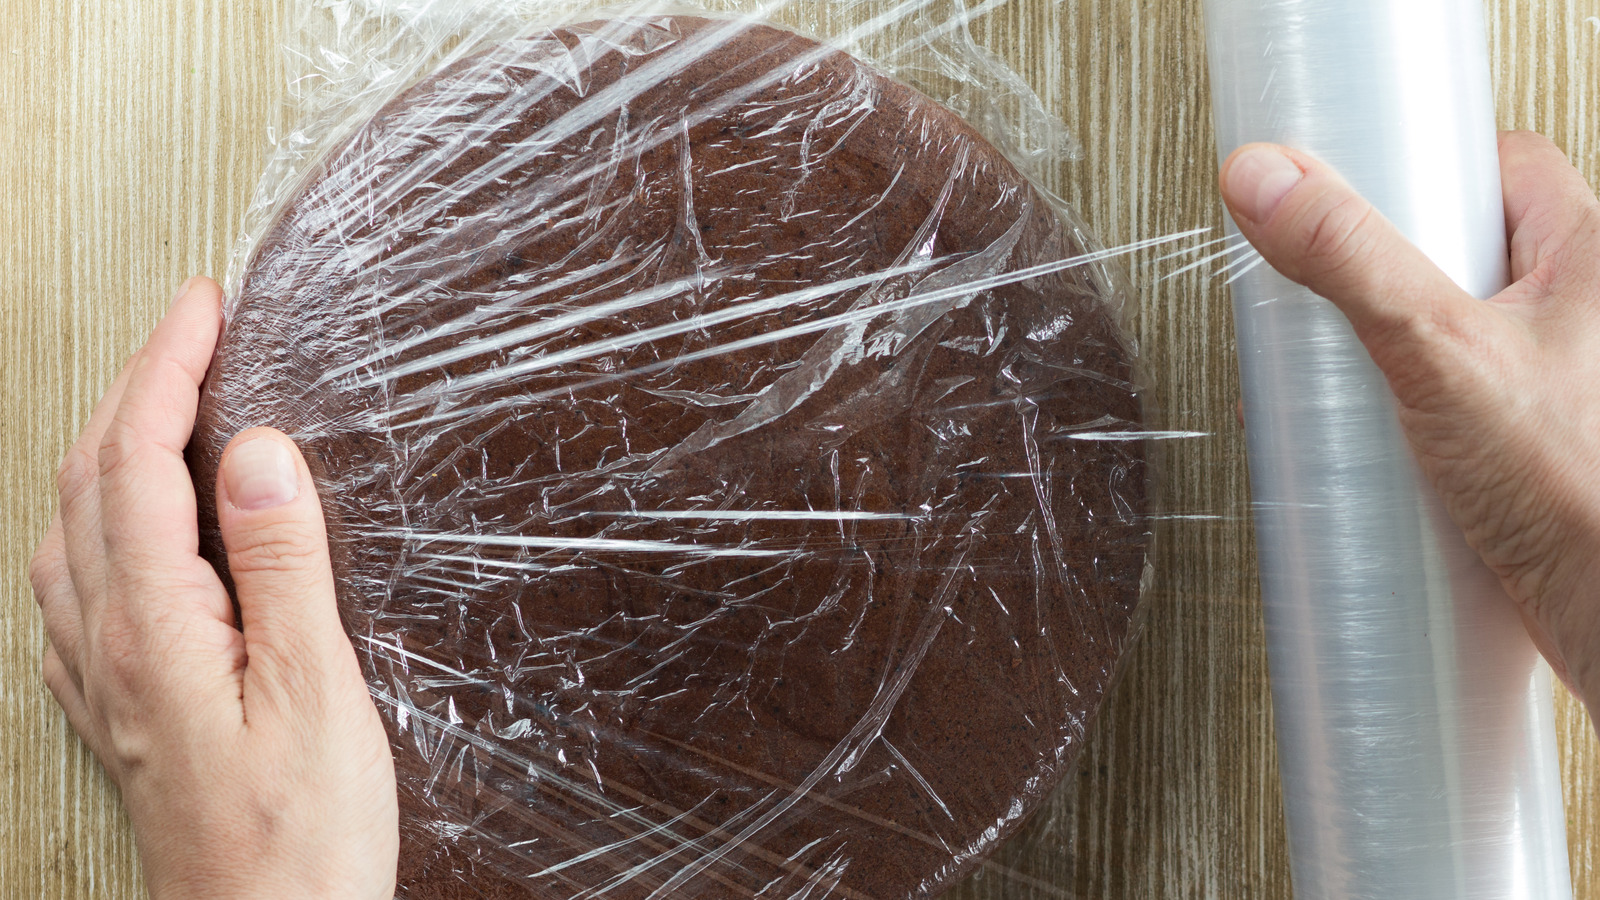 https://www.tastingtable.com/img/gallery/why-it-pays-to-cover-warm-cake-in-plastic-wrap/l-intro-1673978516.jpg